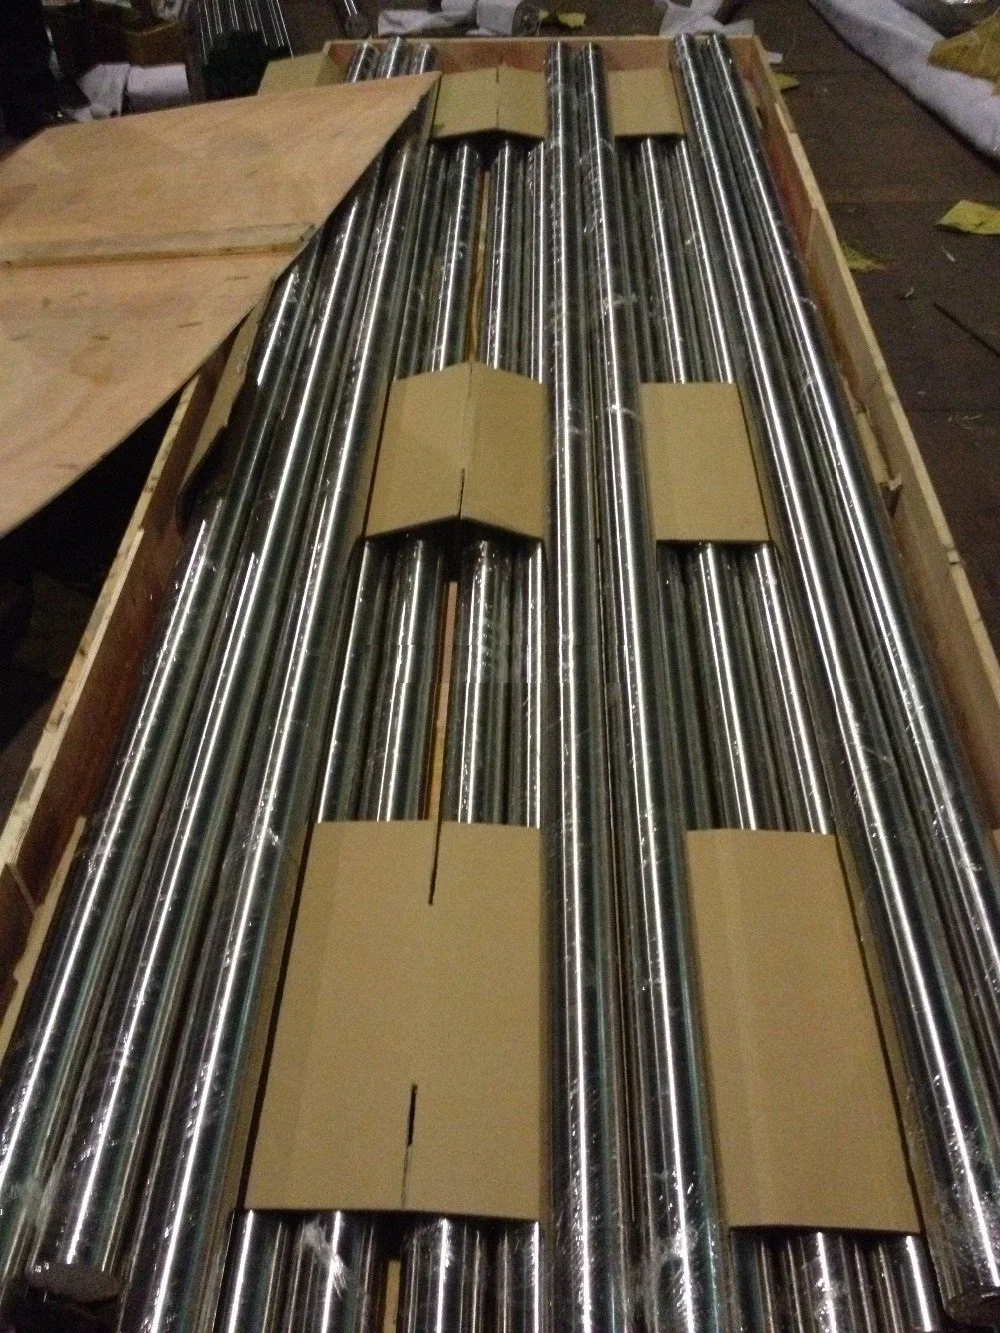 Ss Round Bar 201 410 420 440c 316 316ti Alloy Stainless Steel Bar